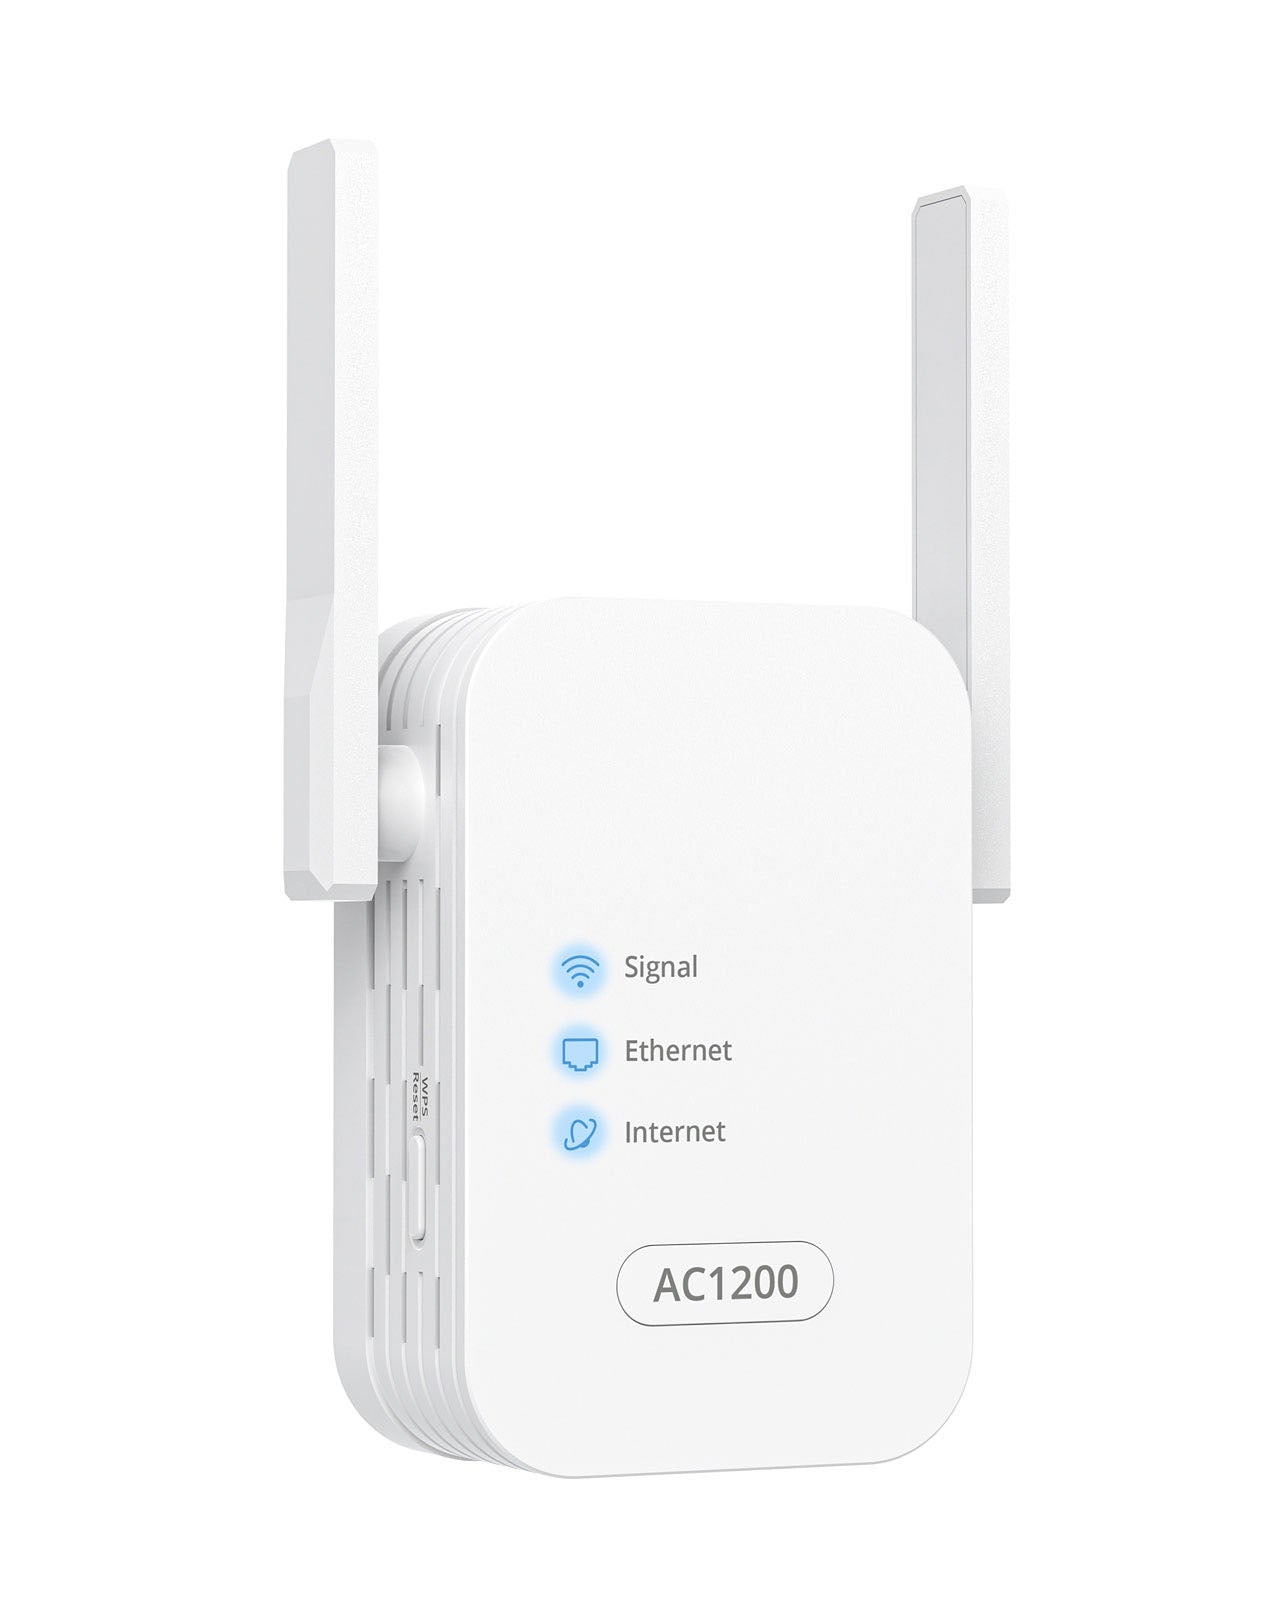 How To Connect WiFi Extender with Ethernet